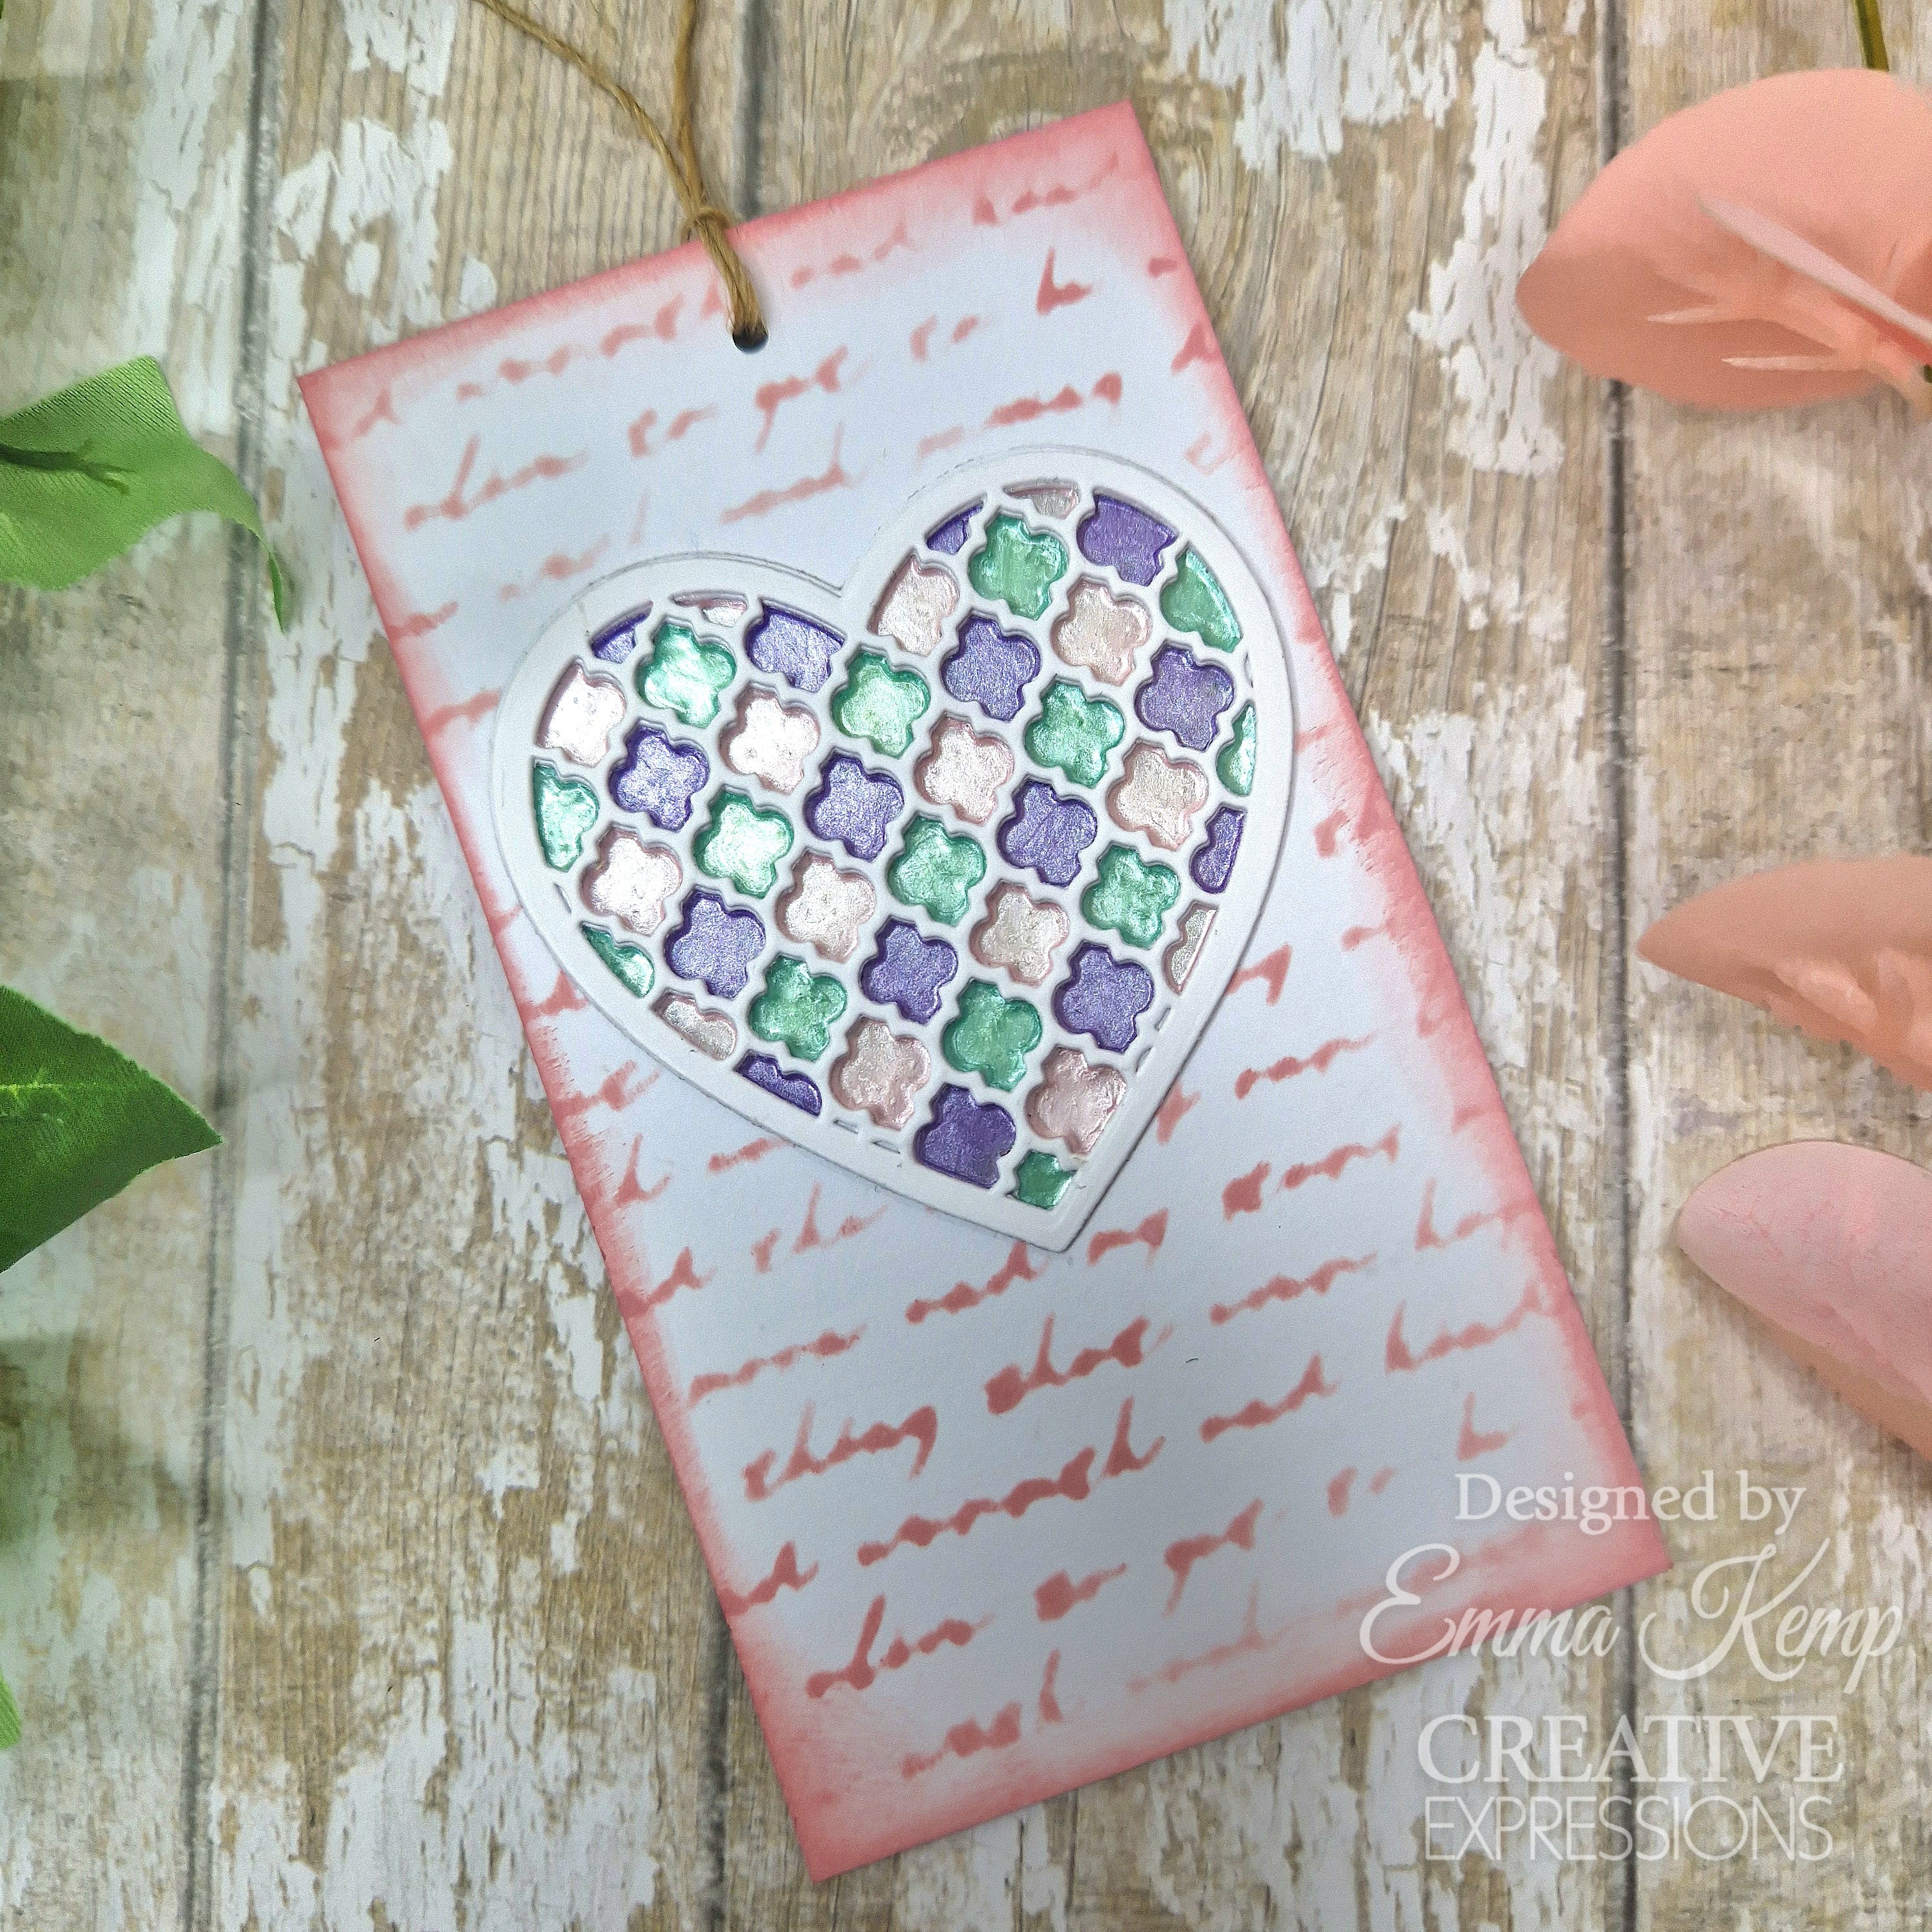 Creative Expressions Jamie Rodgers Everlasting Love Lattice Heart Blossoms Craft Die